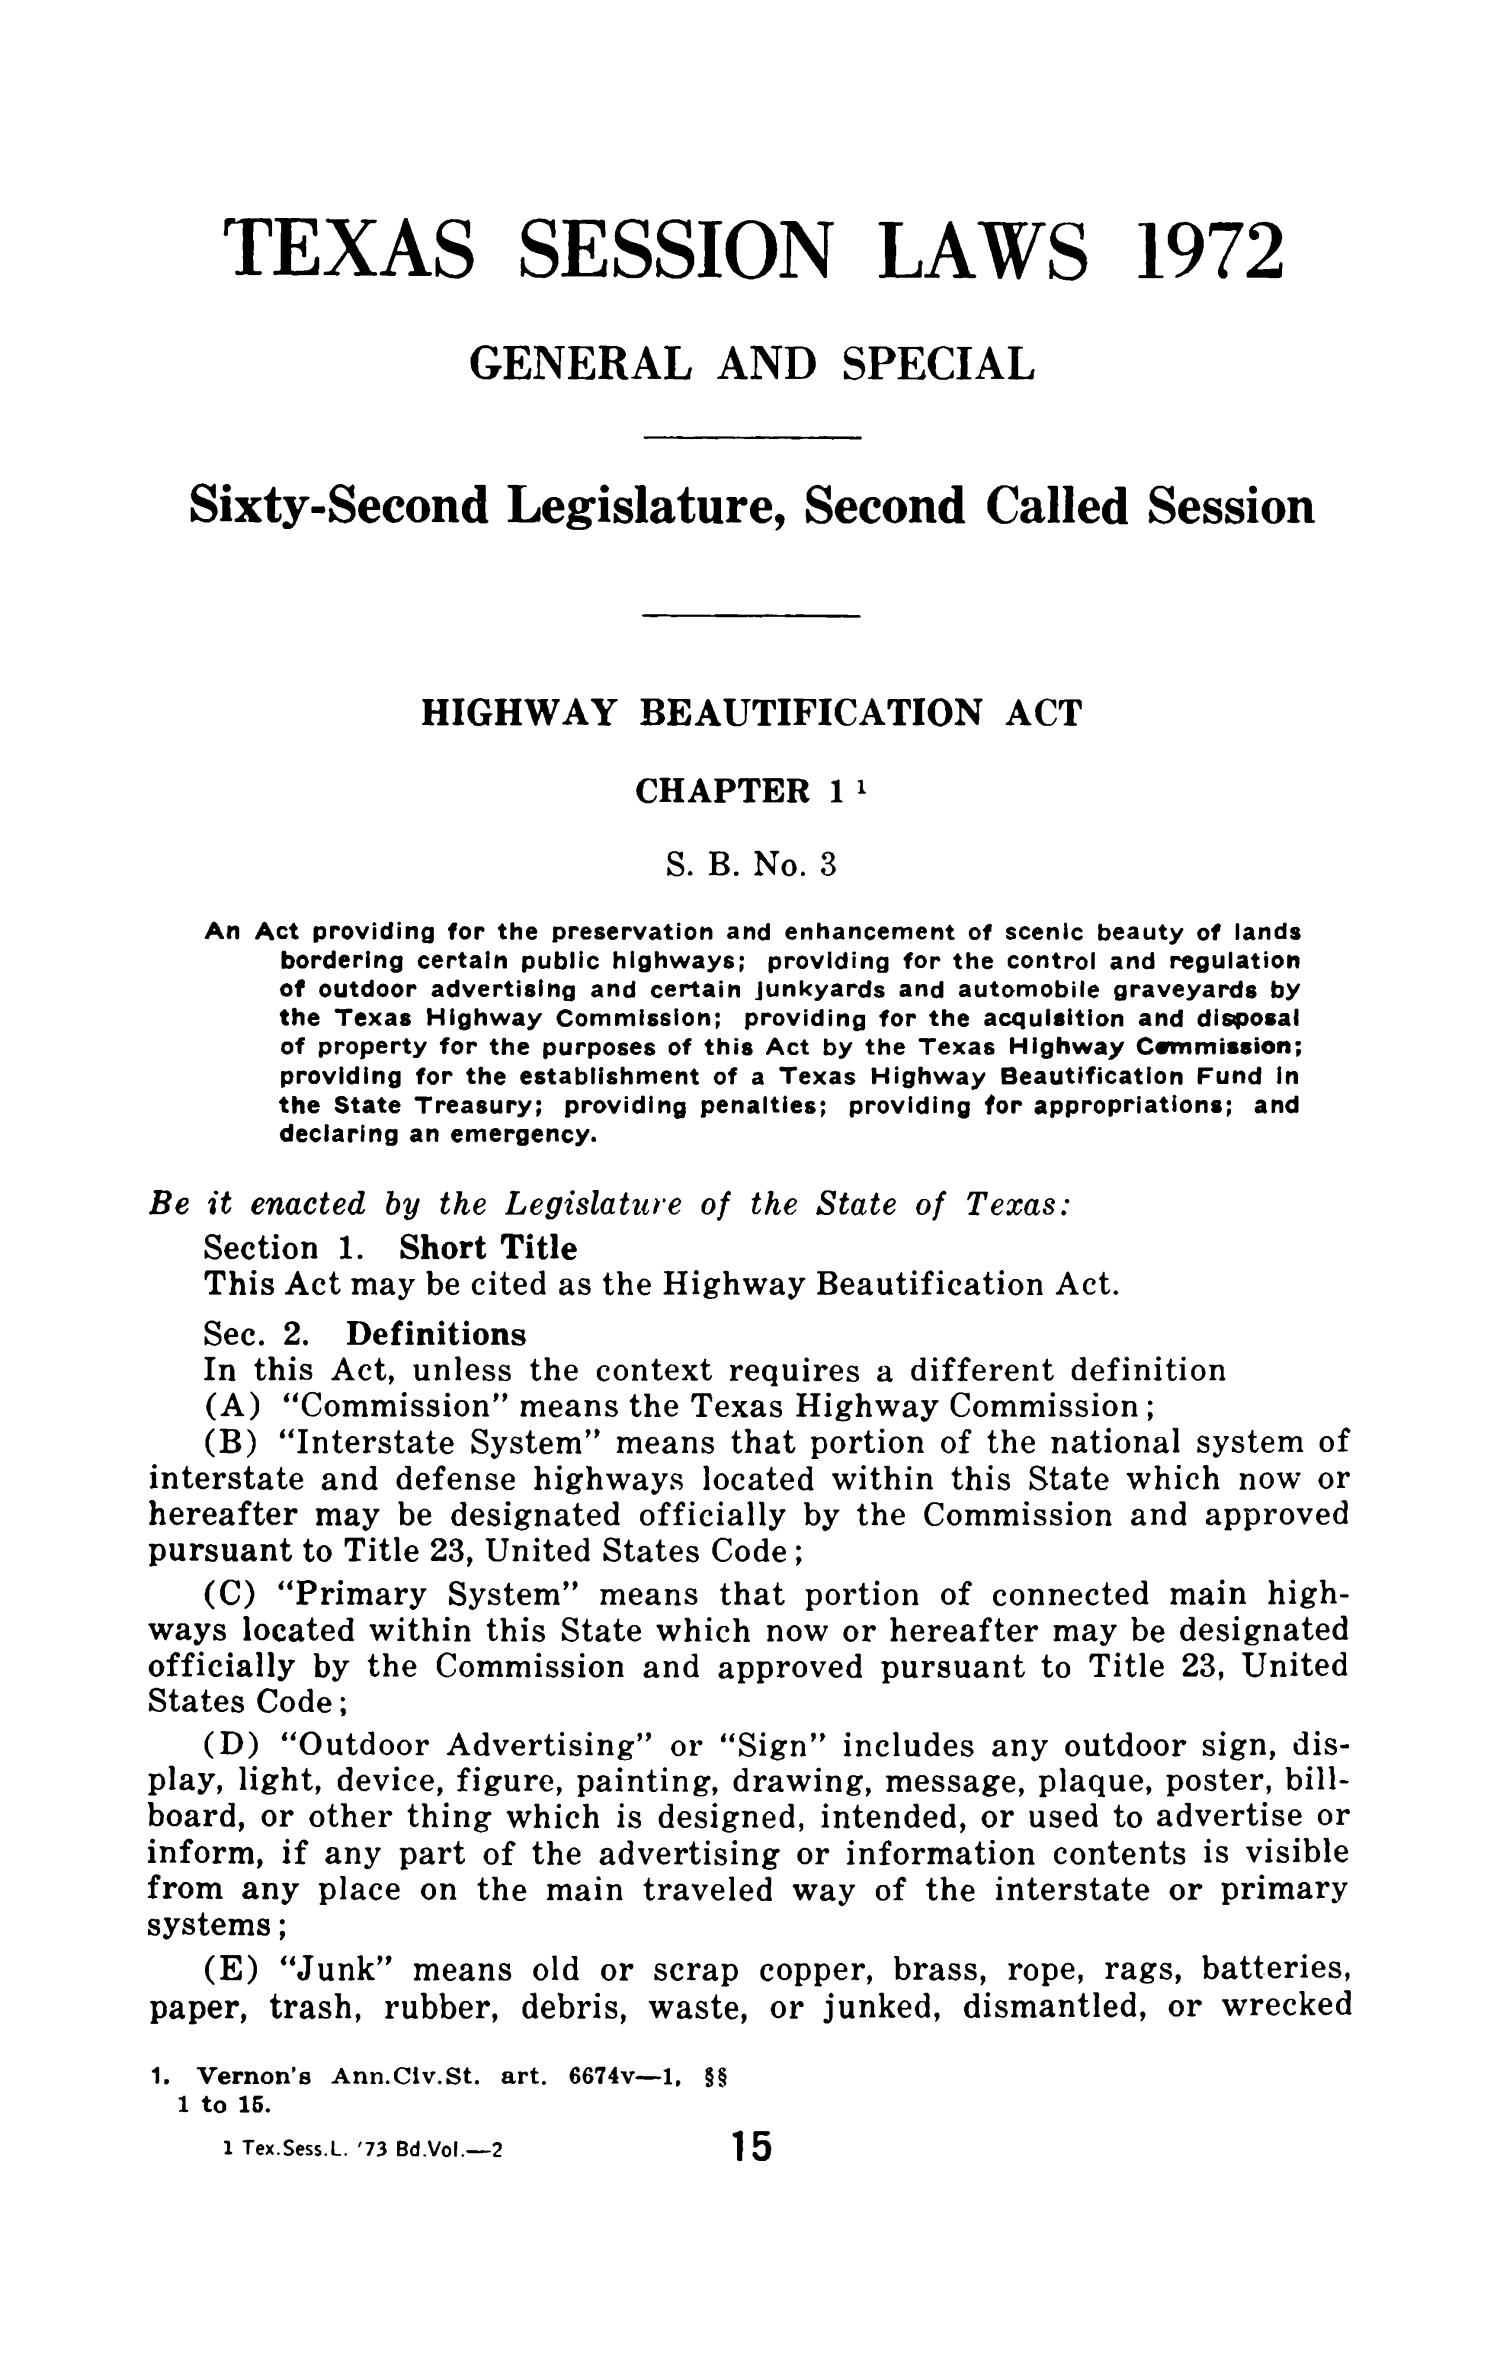 General and Special Laws of The State of Texas Passed By The Second, Third and Fourth Called Sessions of the Sixty-Second Legislature and the Regular Session of the Sixty-Third Legislature
                                                
                                                    15
                                                